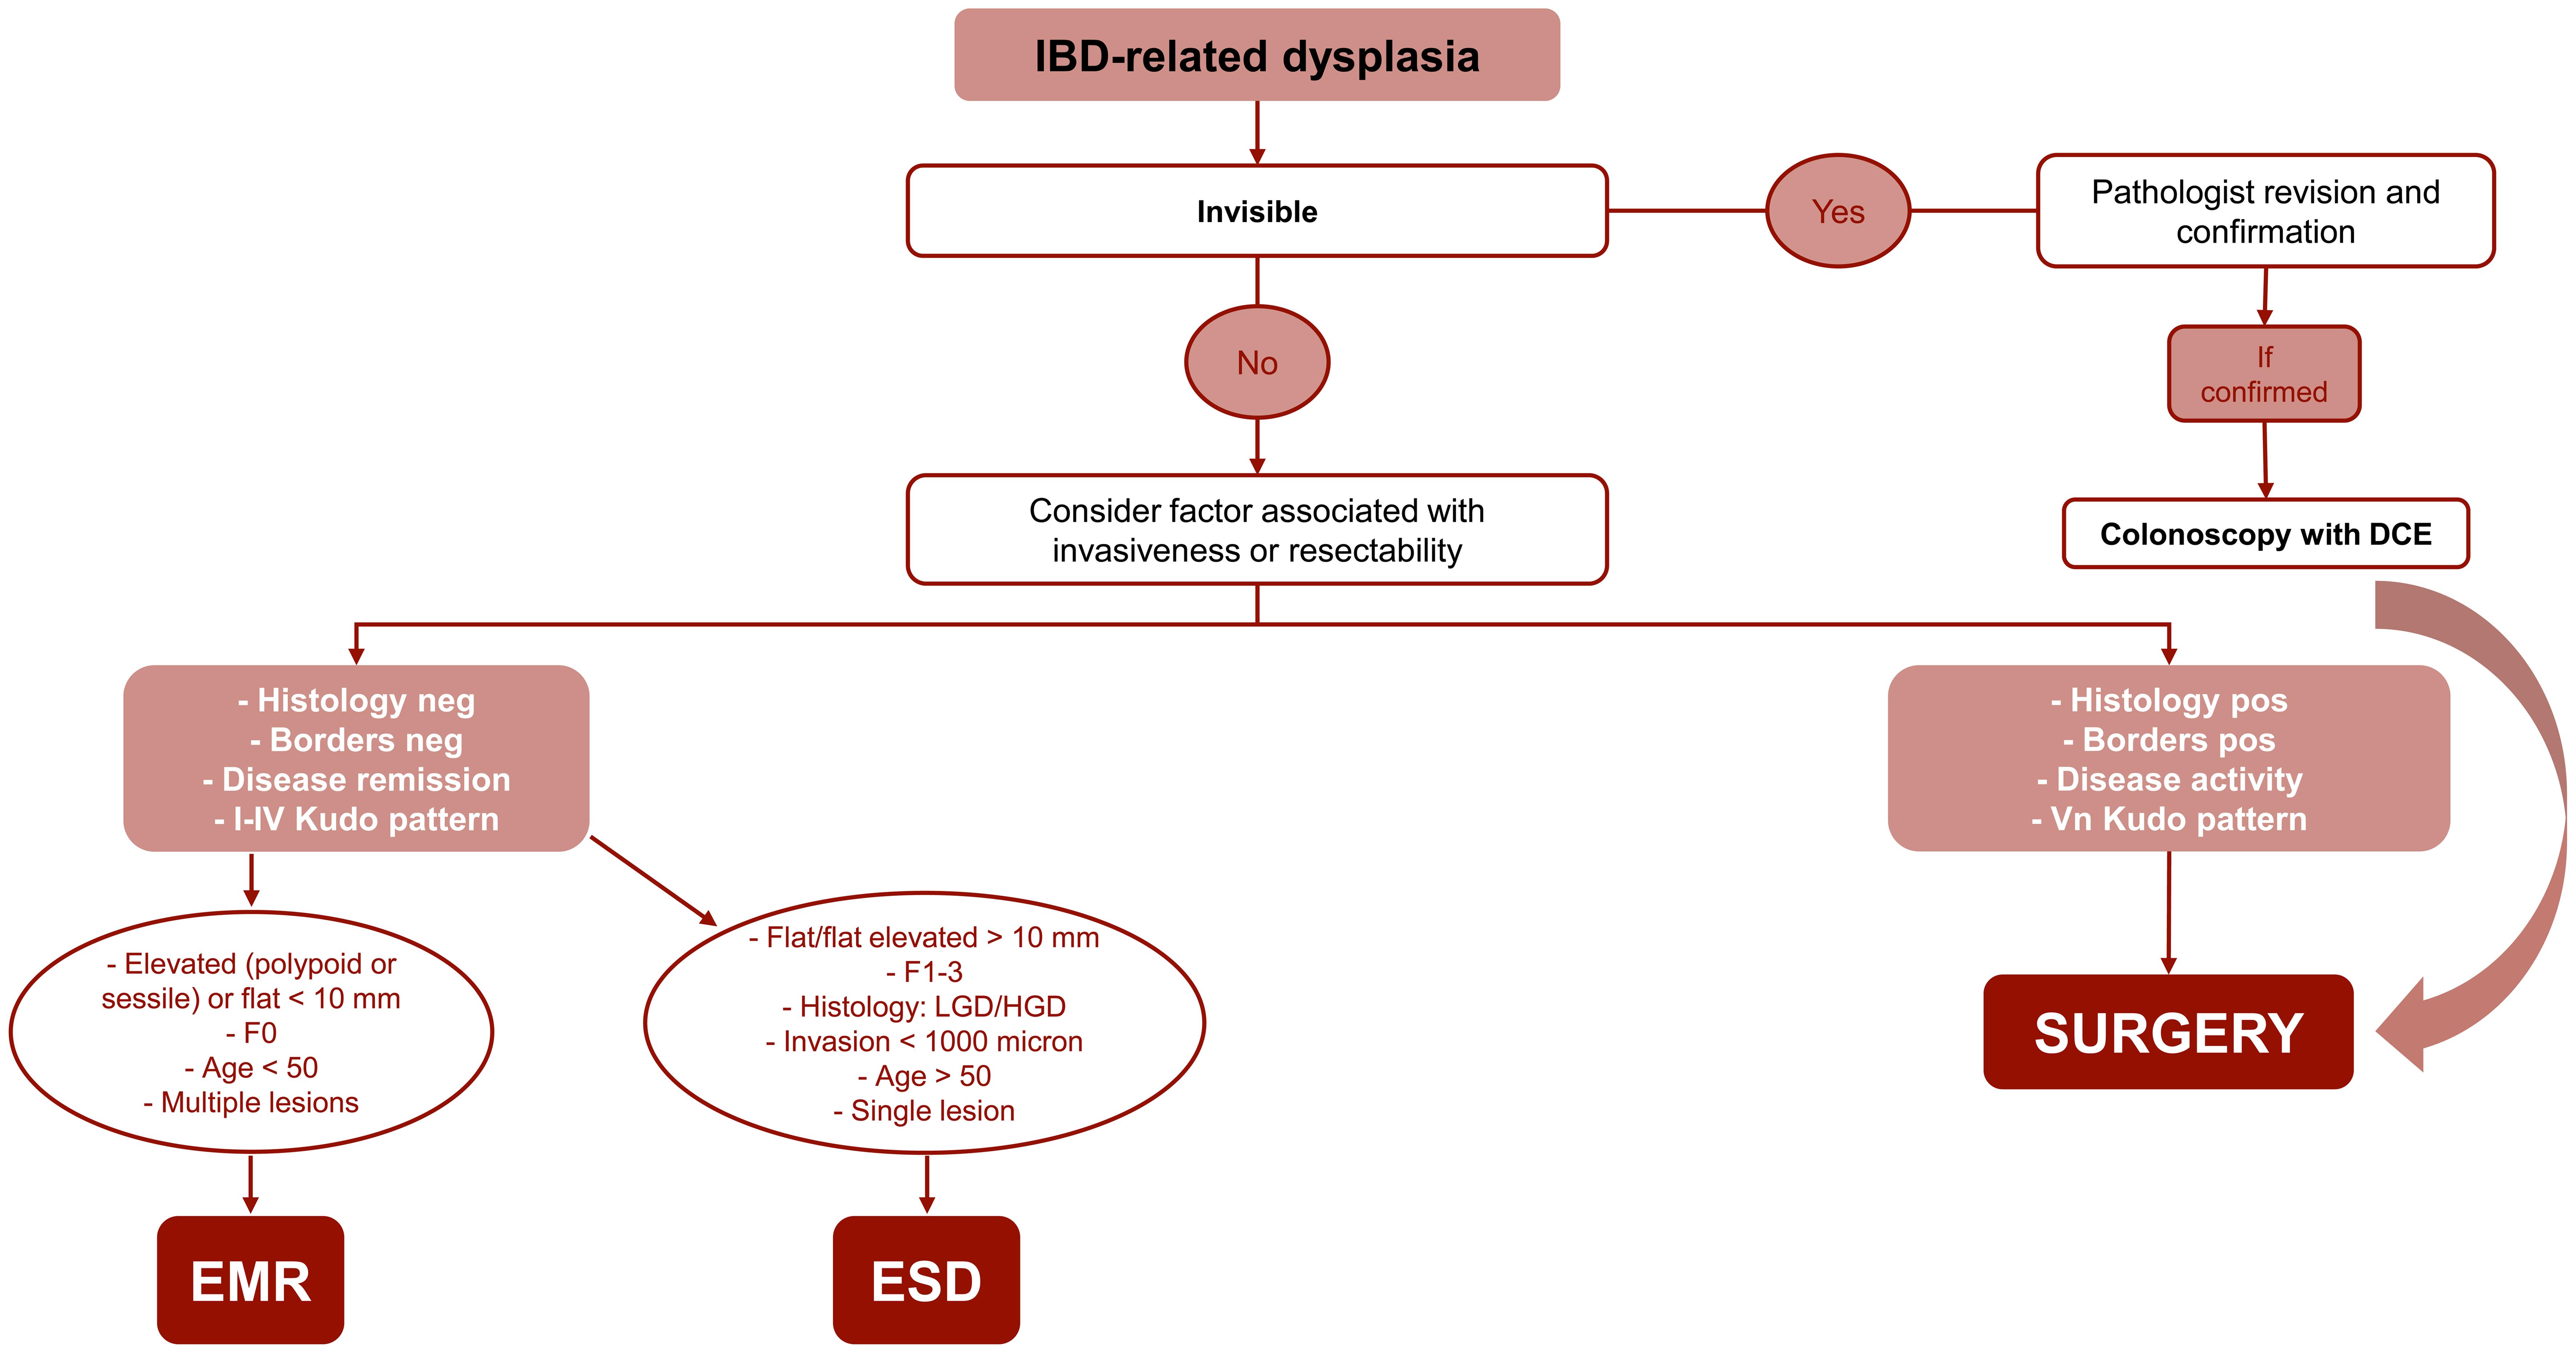 Practical flow chart for the management of visible Inflammatory Bowel Diseases (IBD)-related dysplastic lesions.